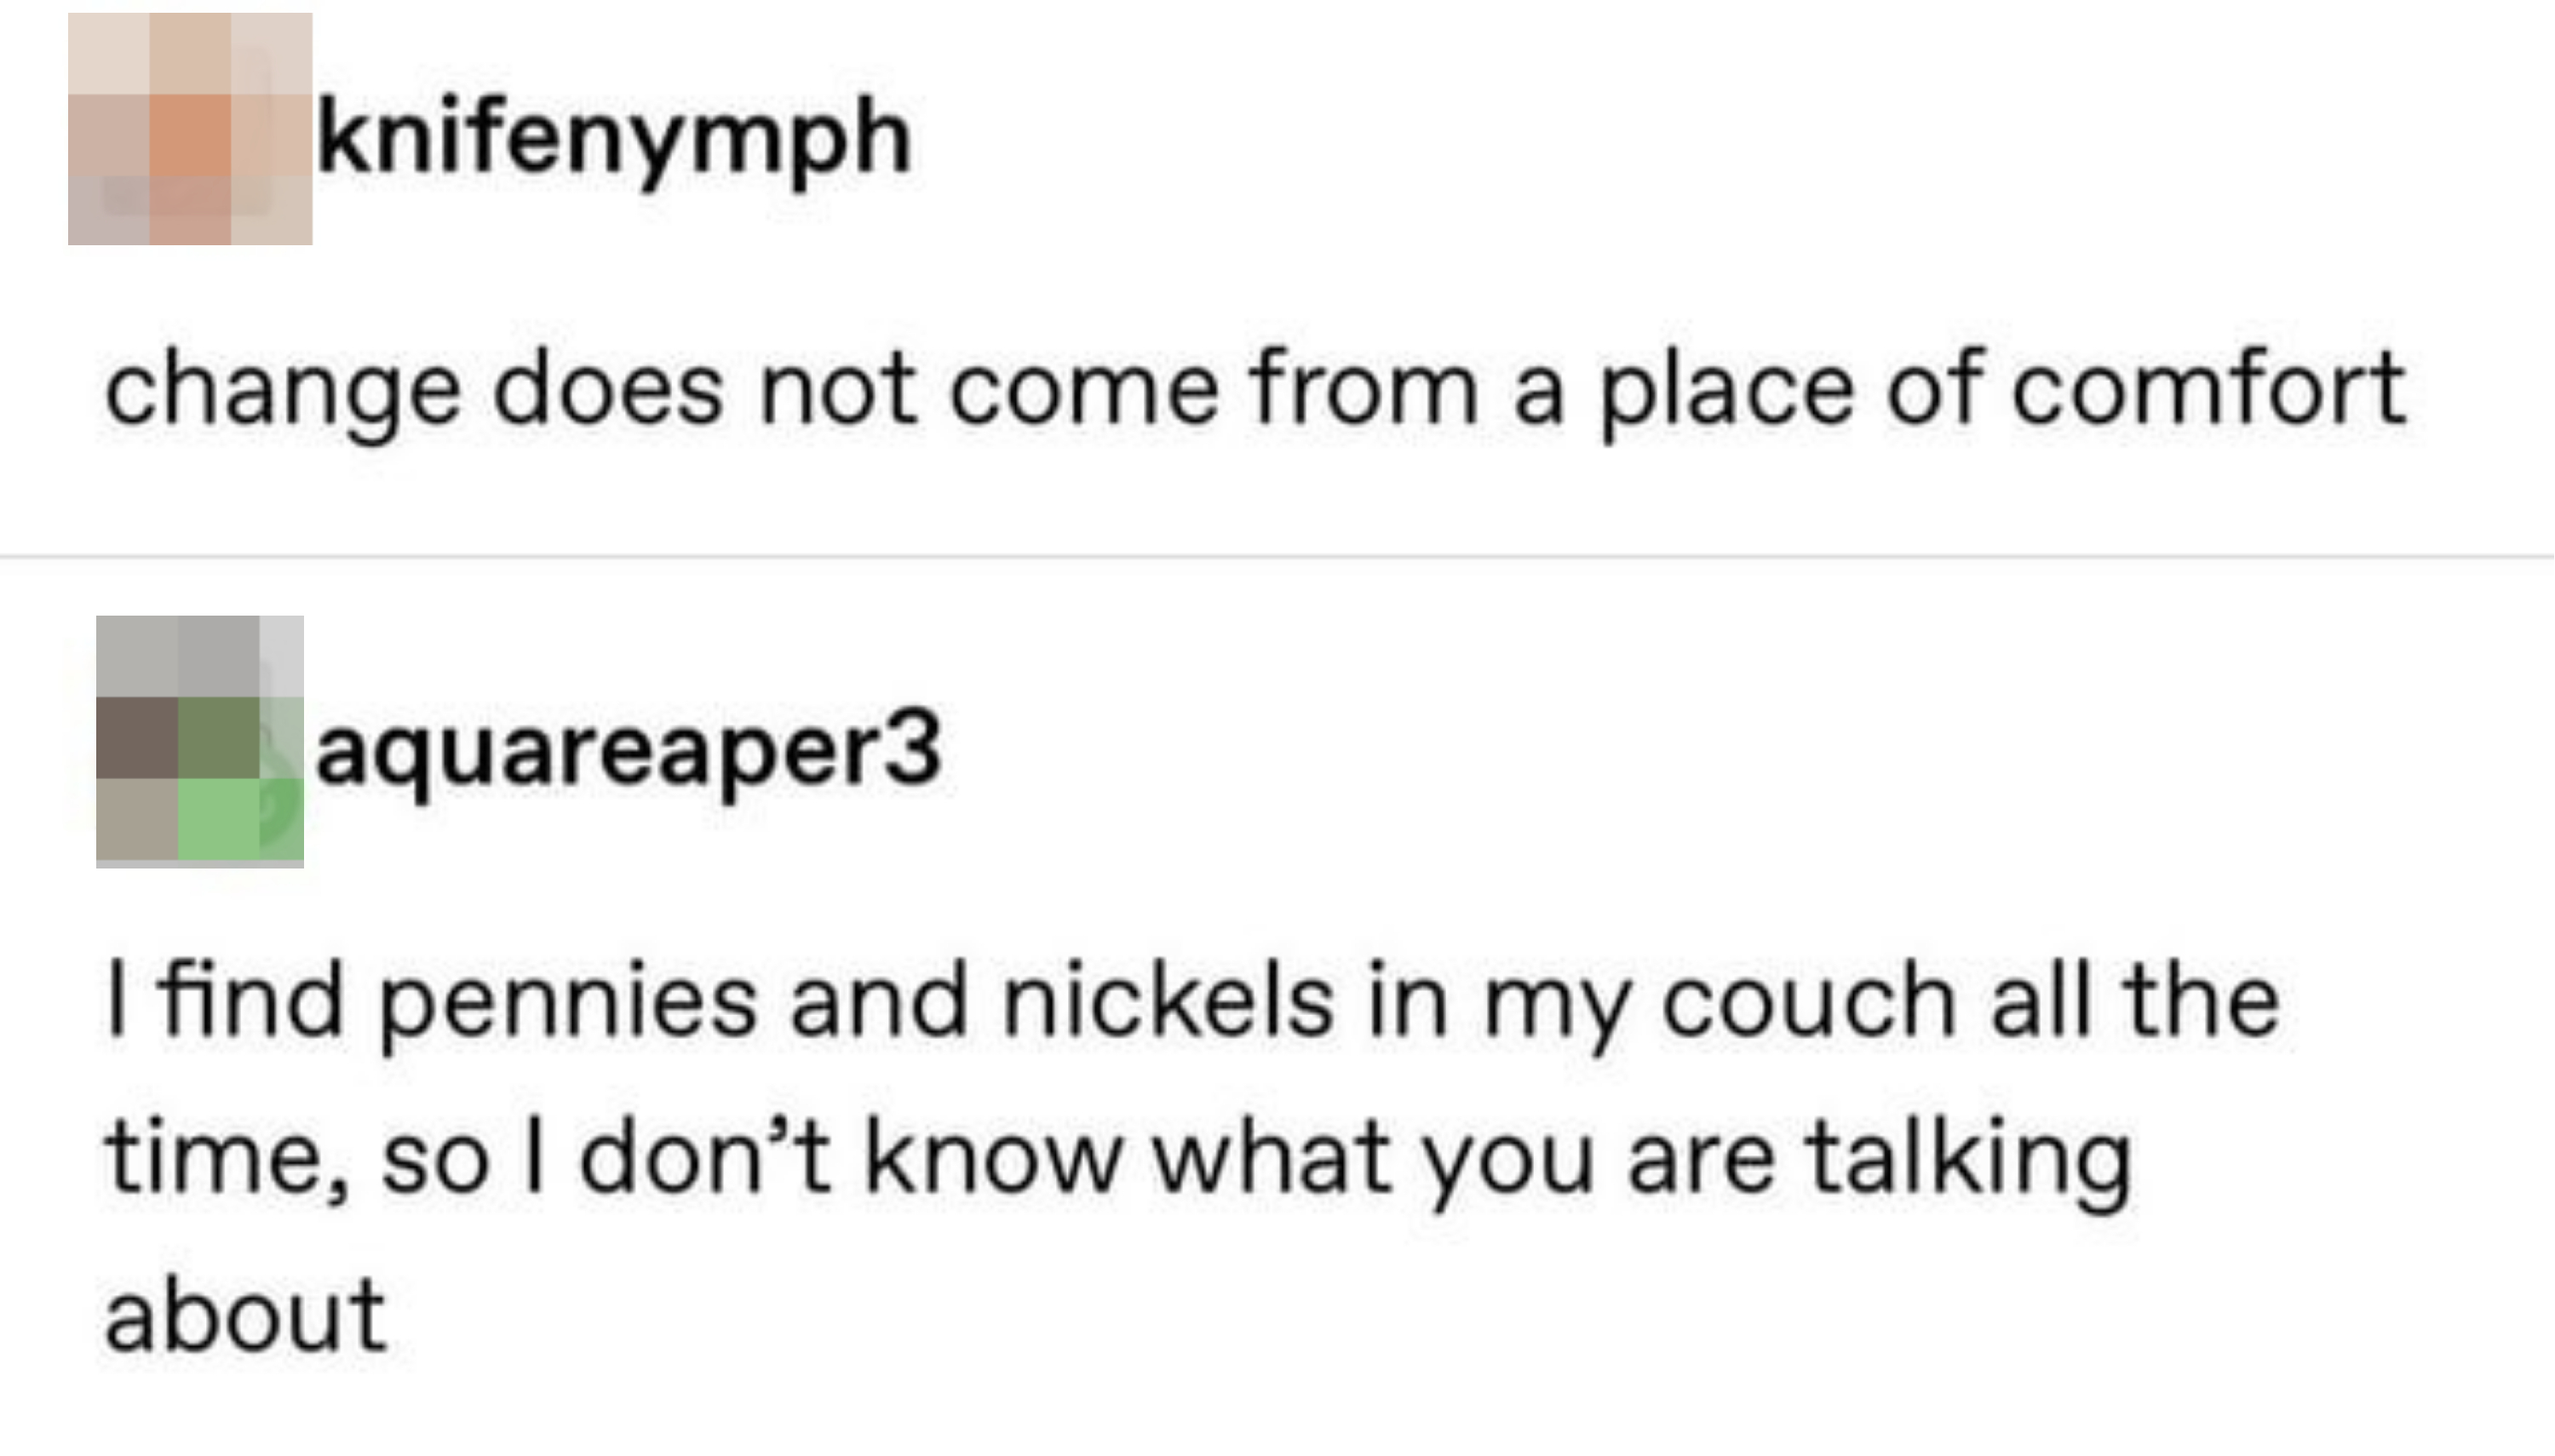 &quot;I find pennies and nickels in my couch all the time, so I don&#x27;t know what you are talking about&quot;